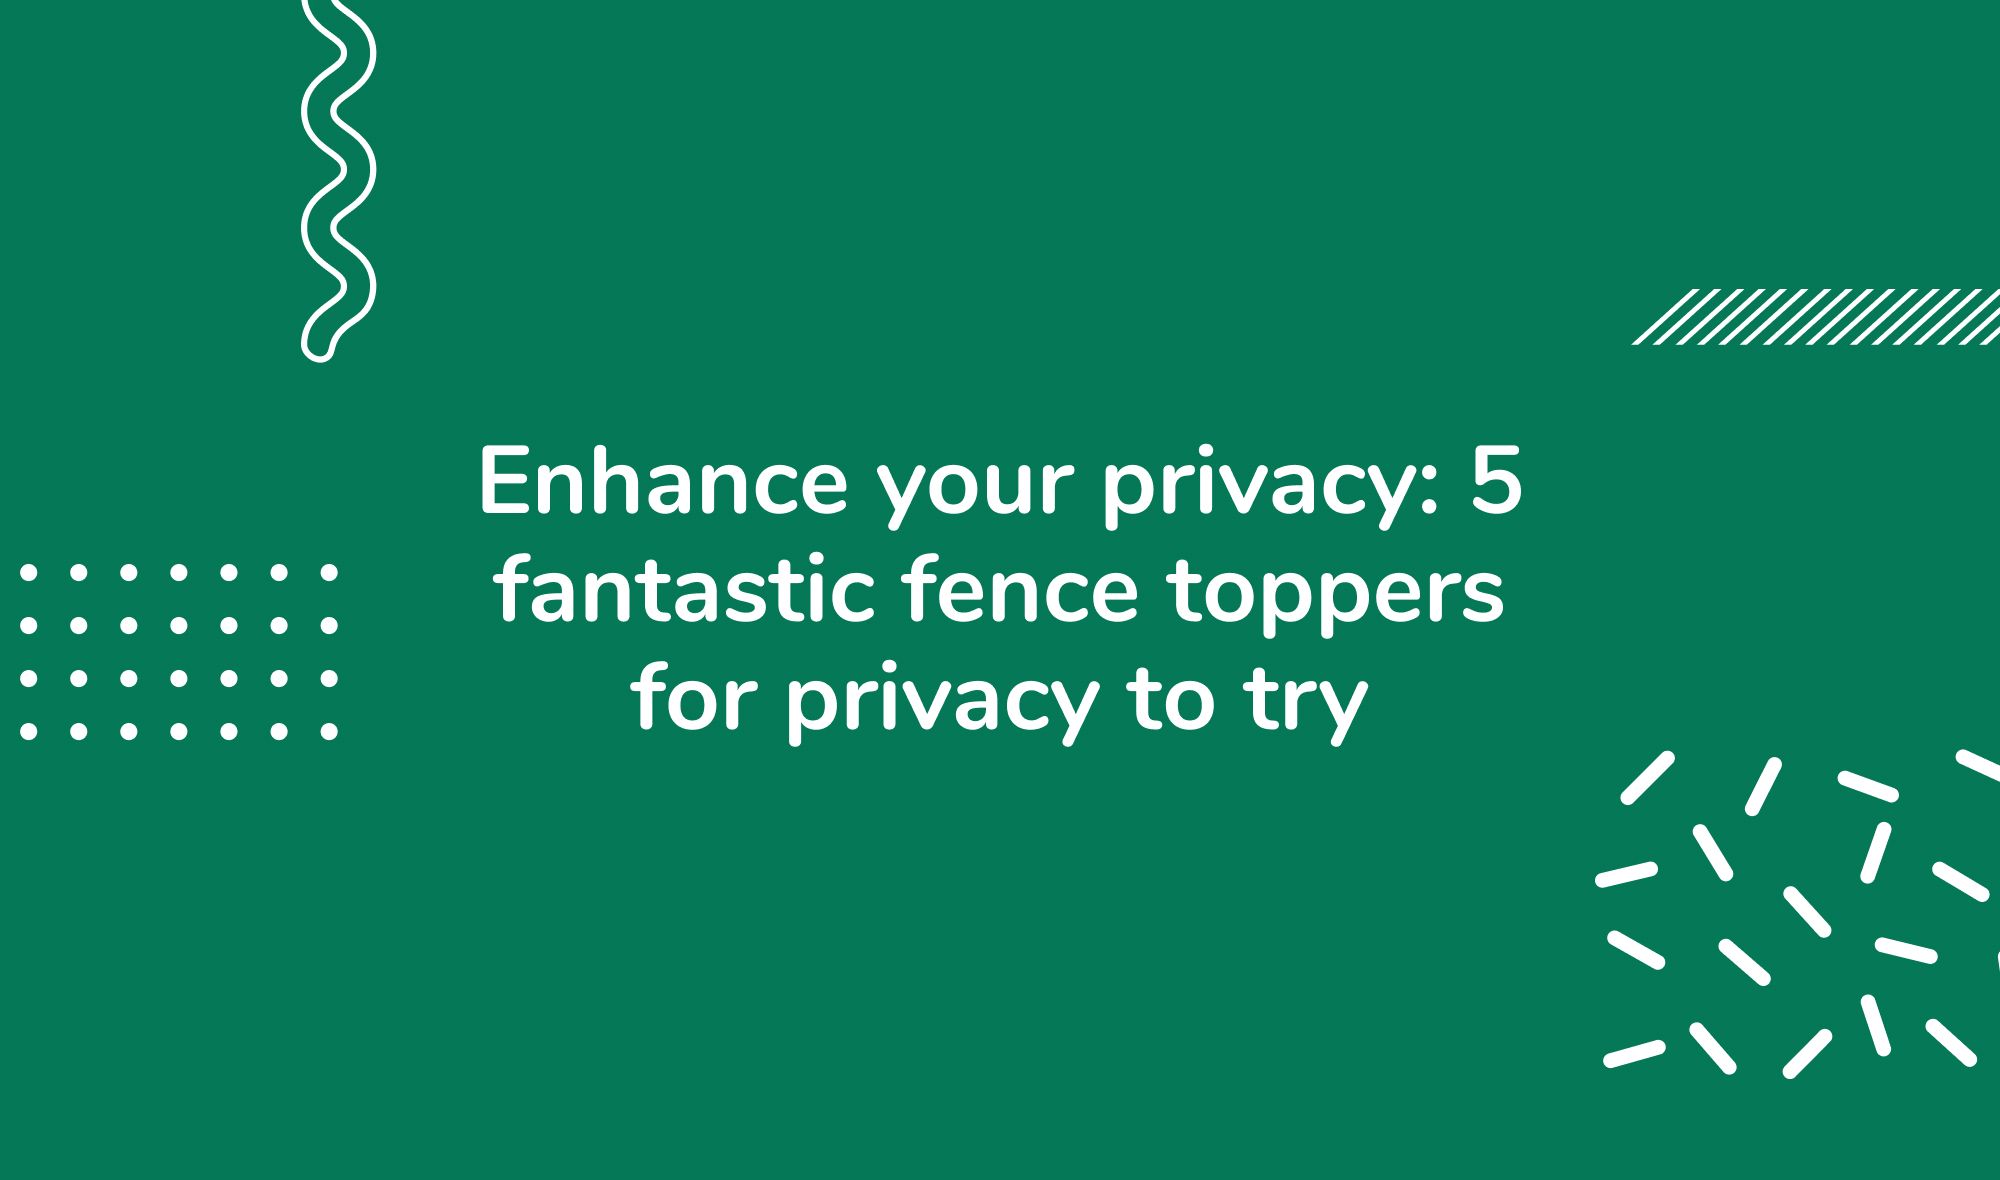 Enhance your privacy: 5 fantastic fence toppers for privacy to try